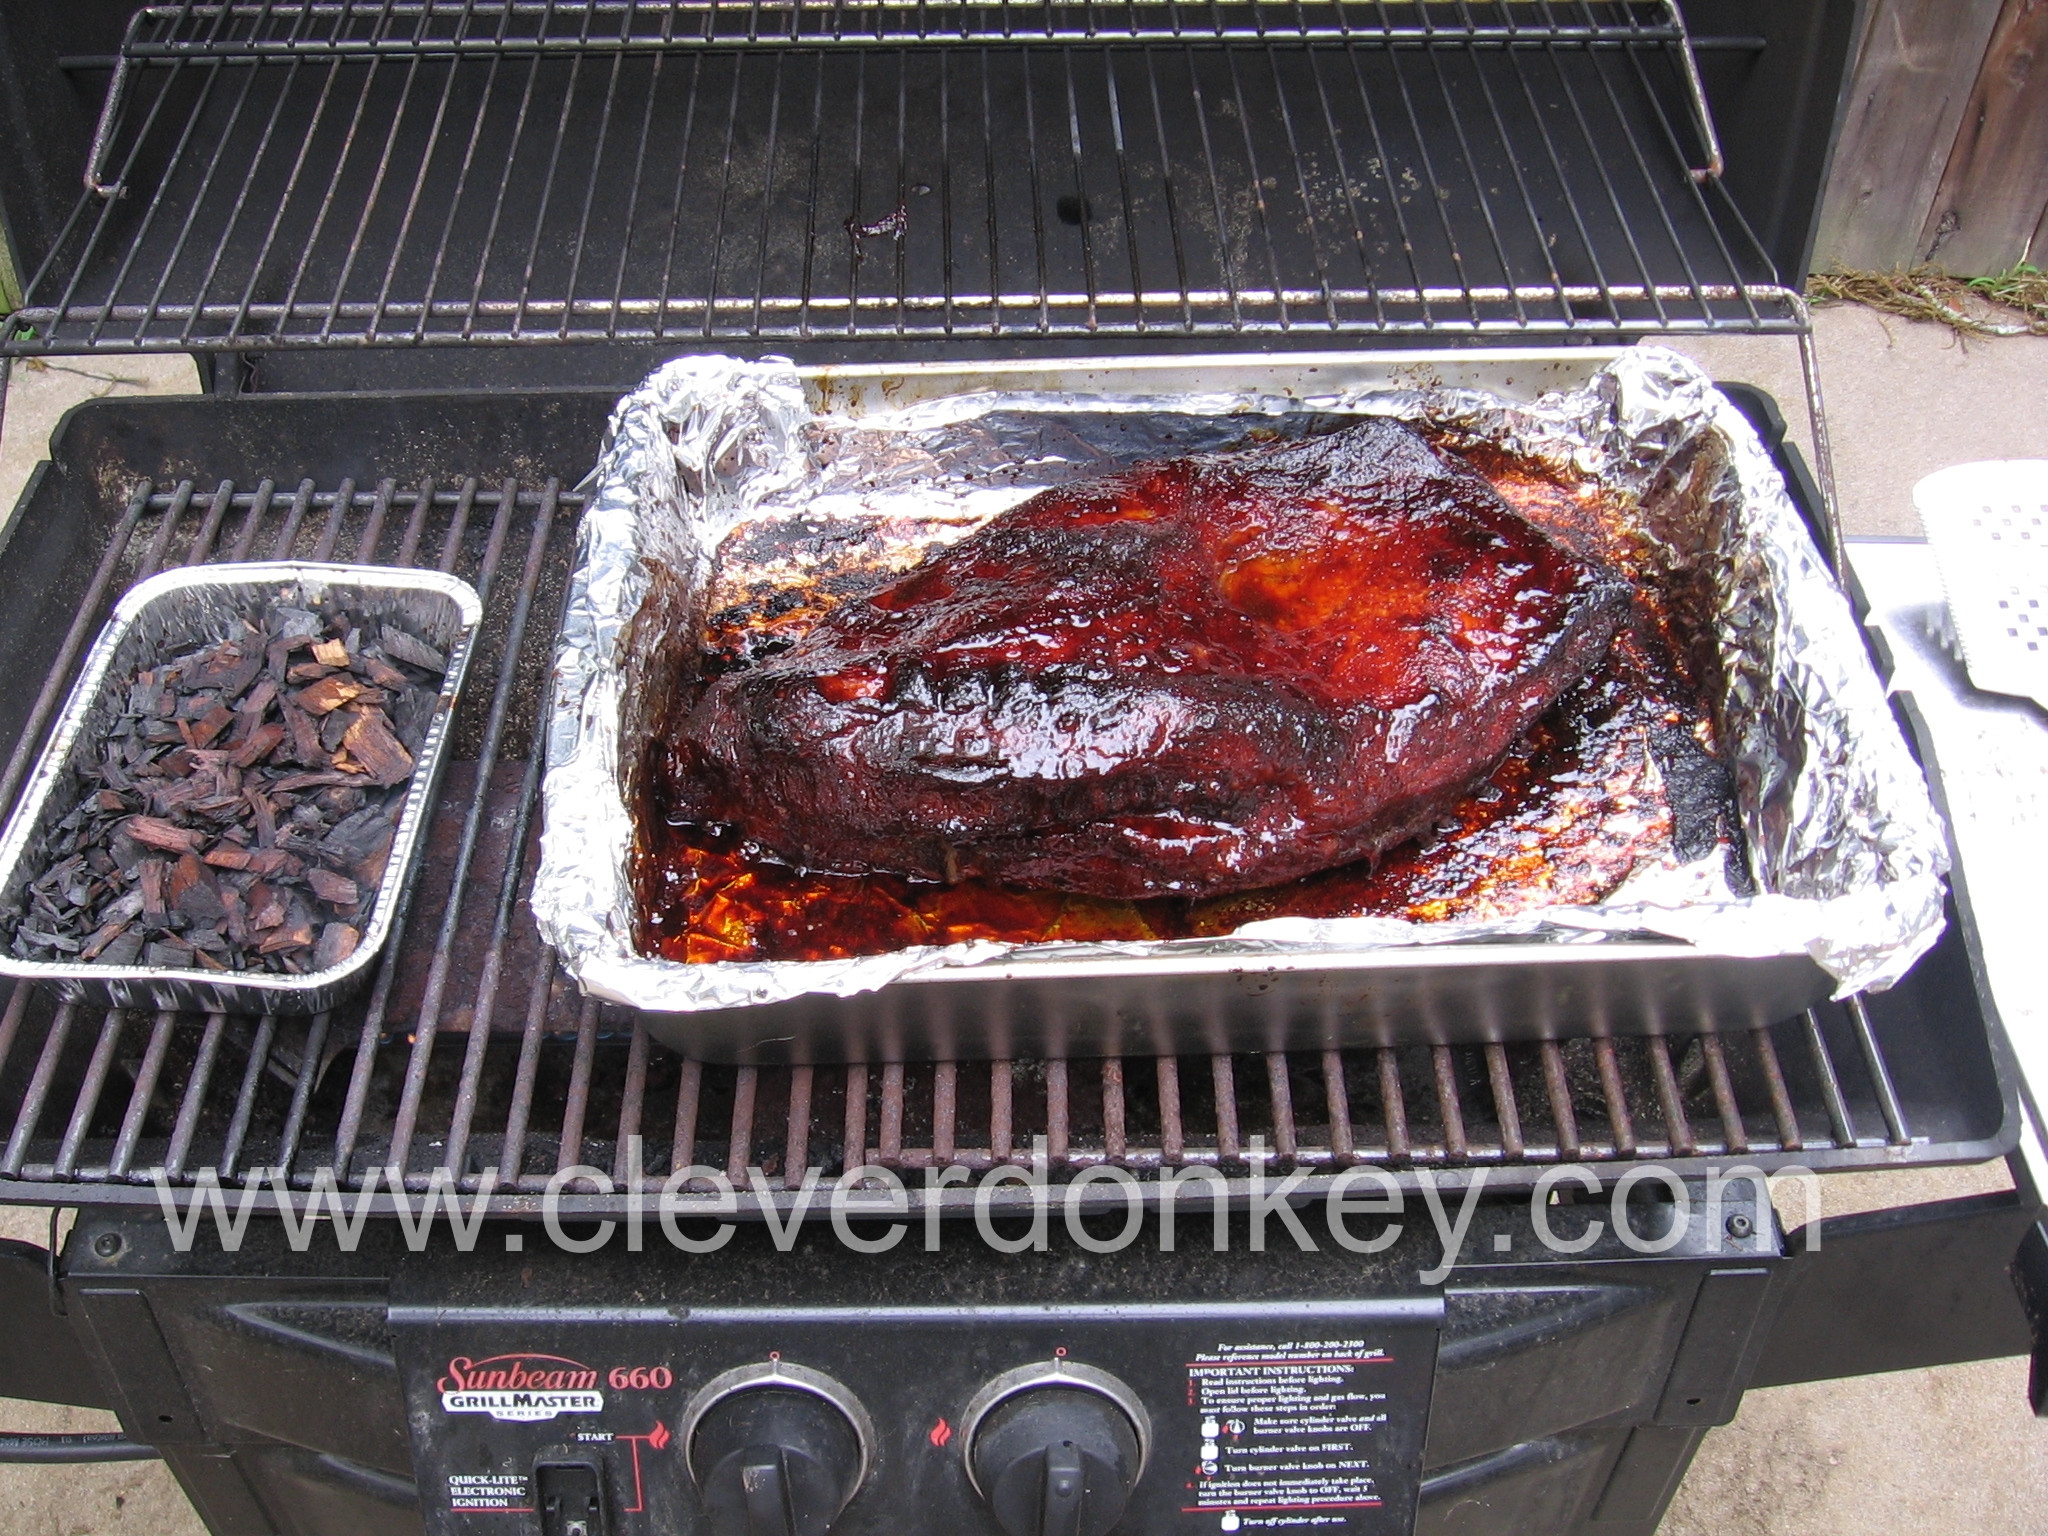 Beef Brisket On Gas Grill
 CleverDonkey Tender and Juicy Texas Style Barbeque